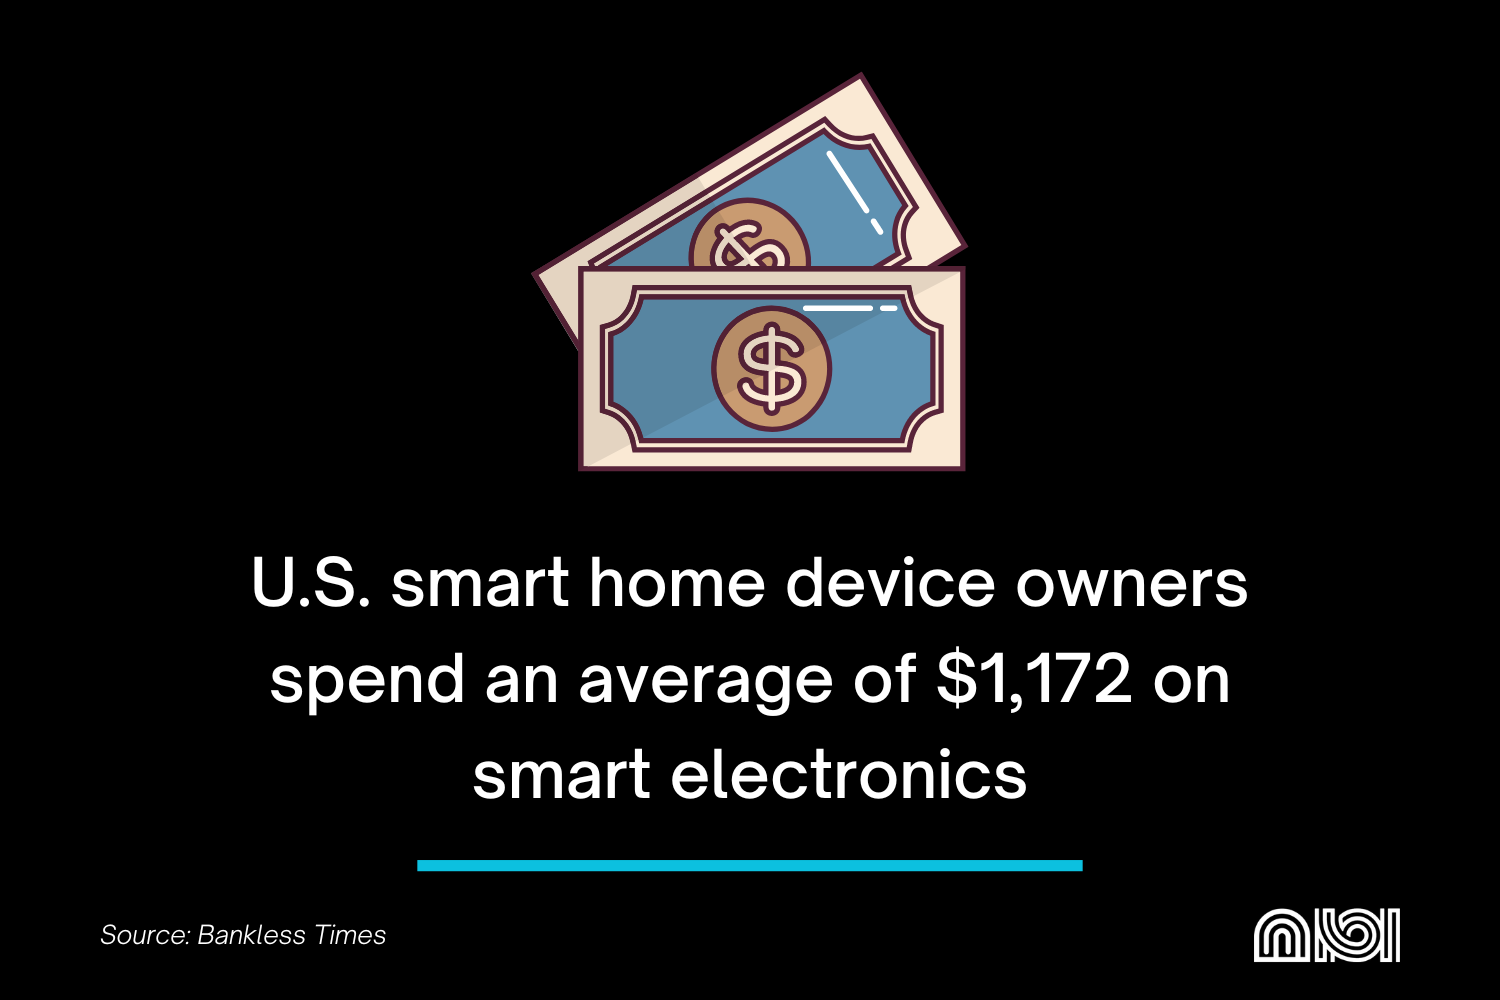 U.S. smart home device owners spending an average of $1,172 on smart electronics